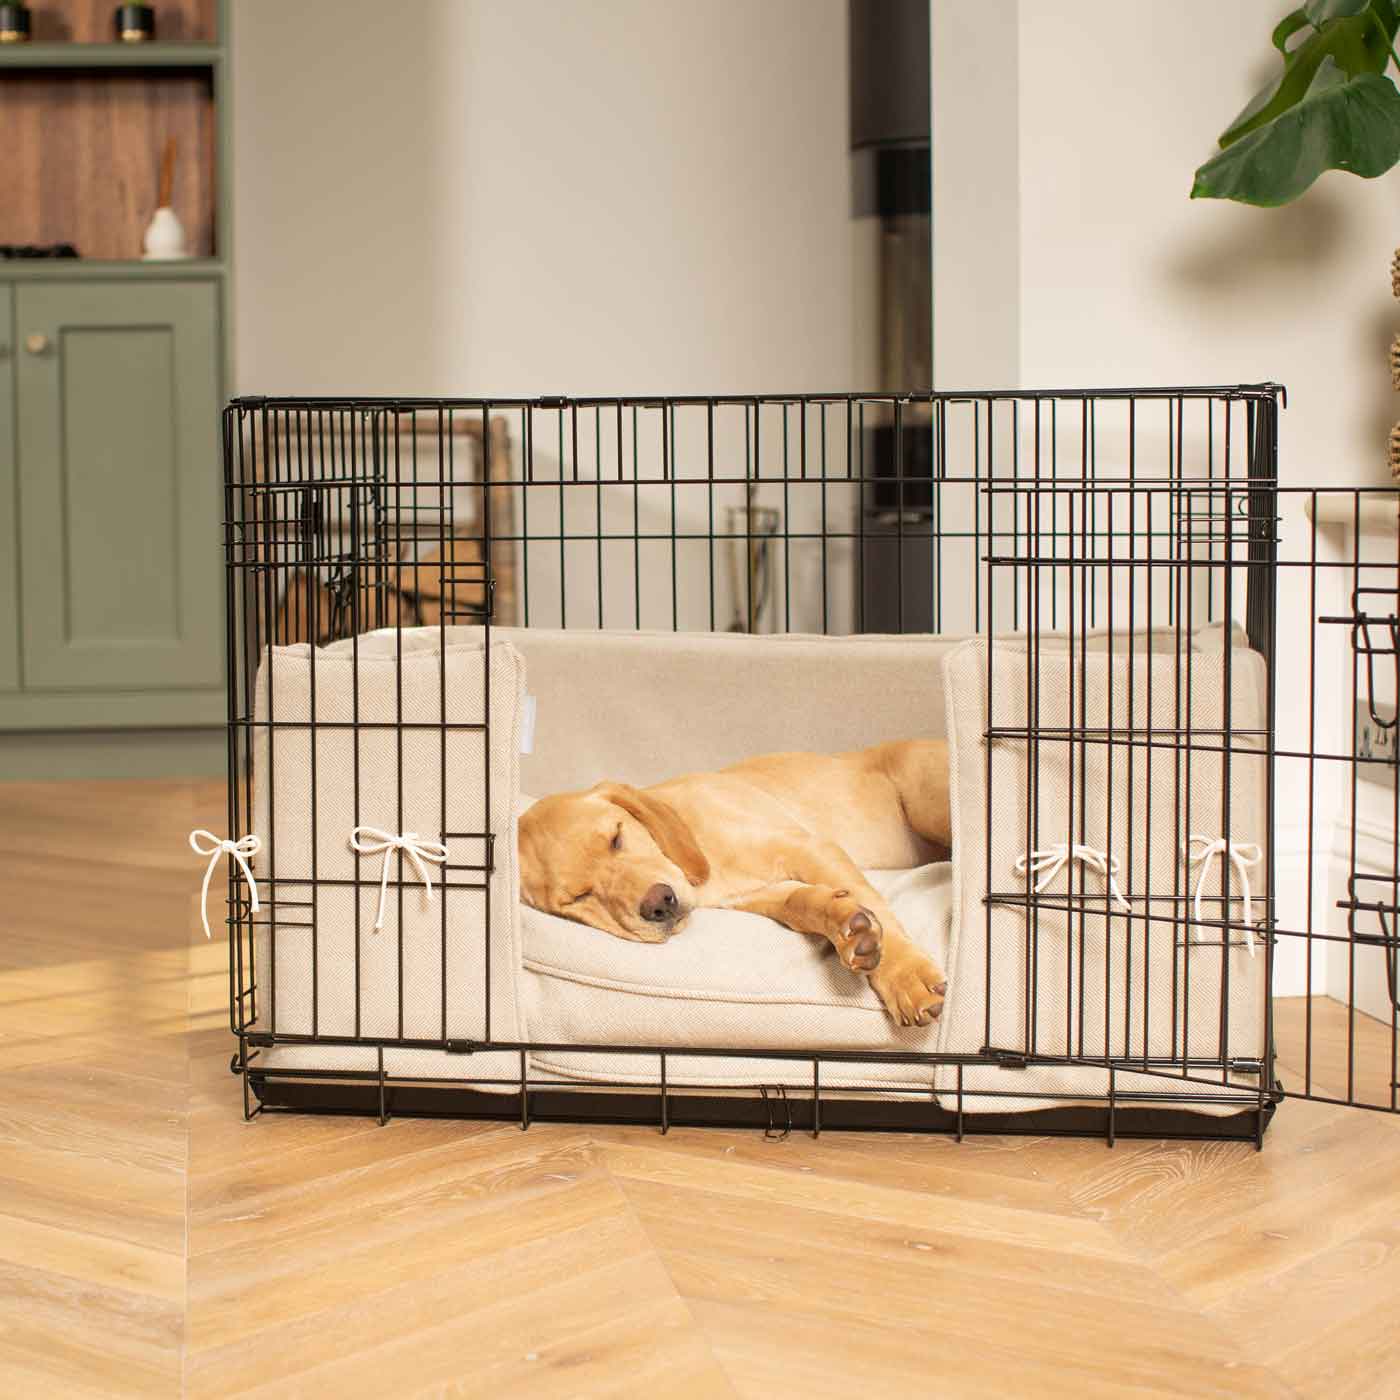 Luxury Dog Cage Bumper, Natural Herringbone Tweed Cage Bumper Cover The Perfect Dog Cage Accessory, Available To Personalize Now at Lords & Labradors US